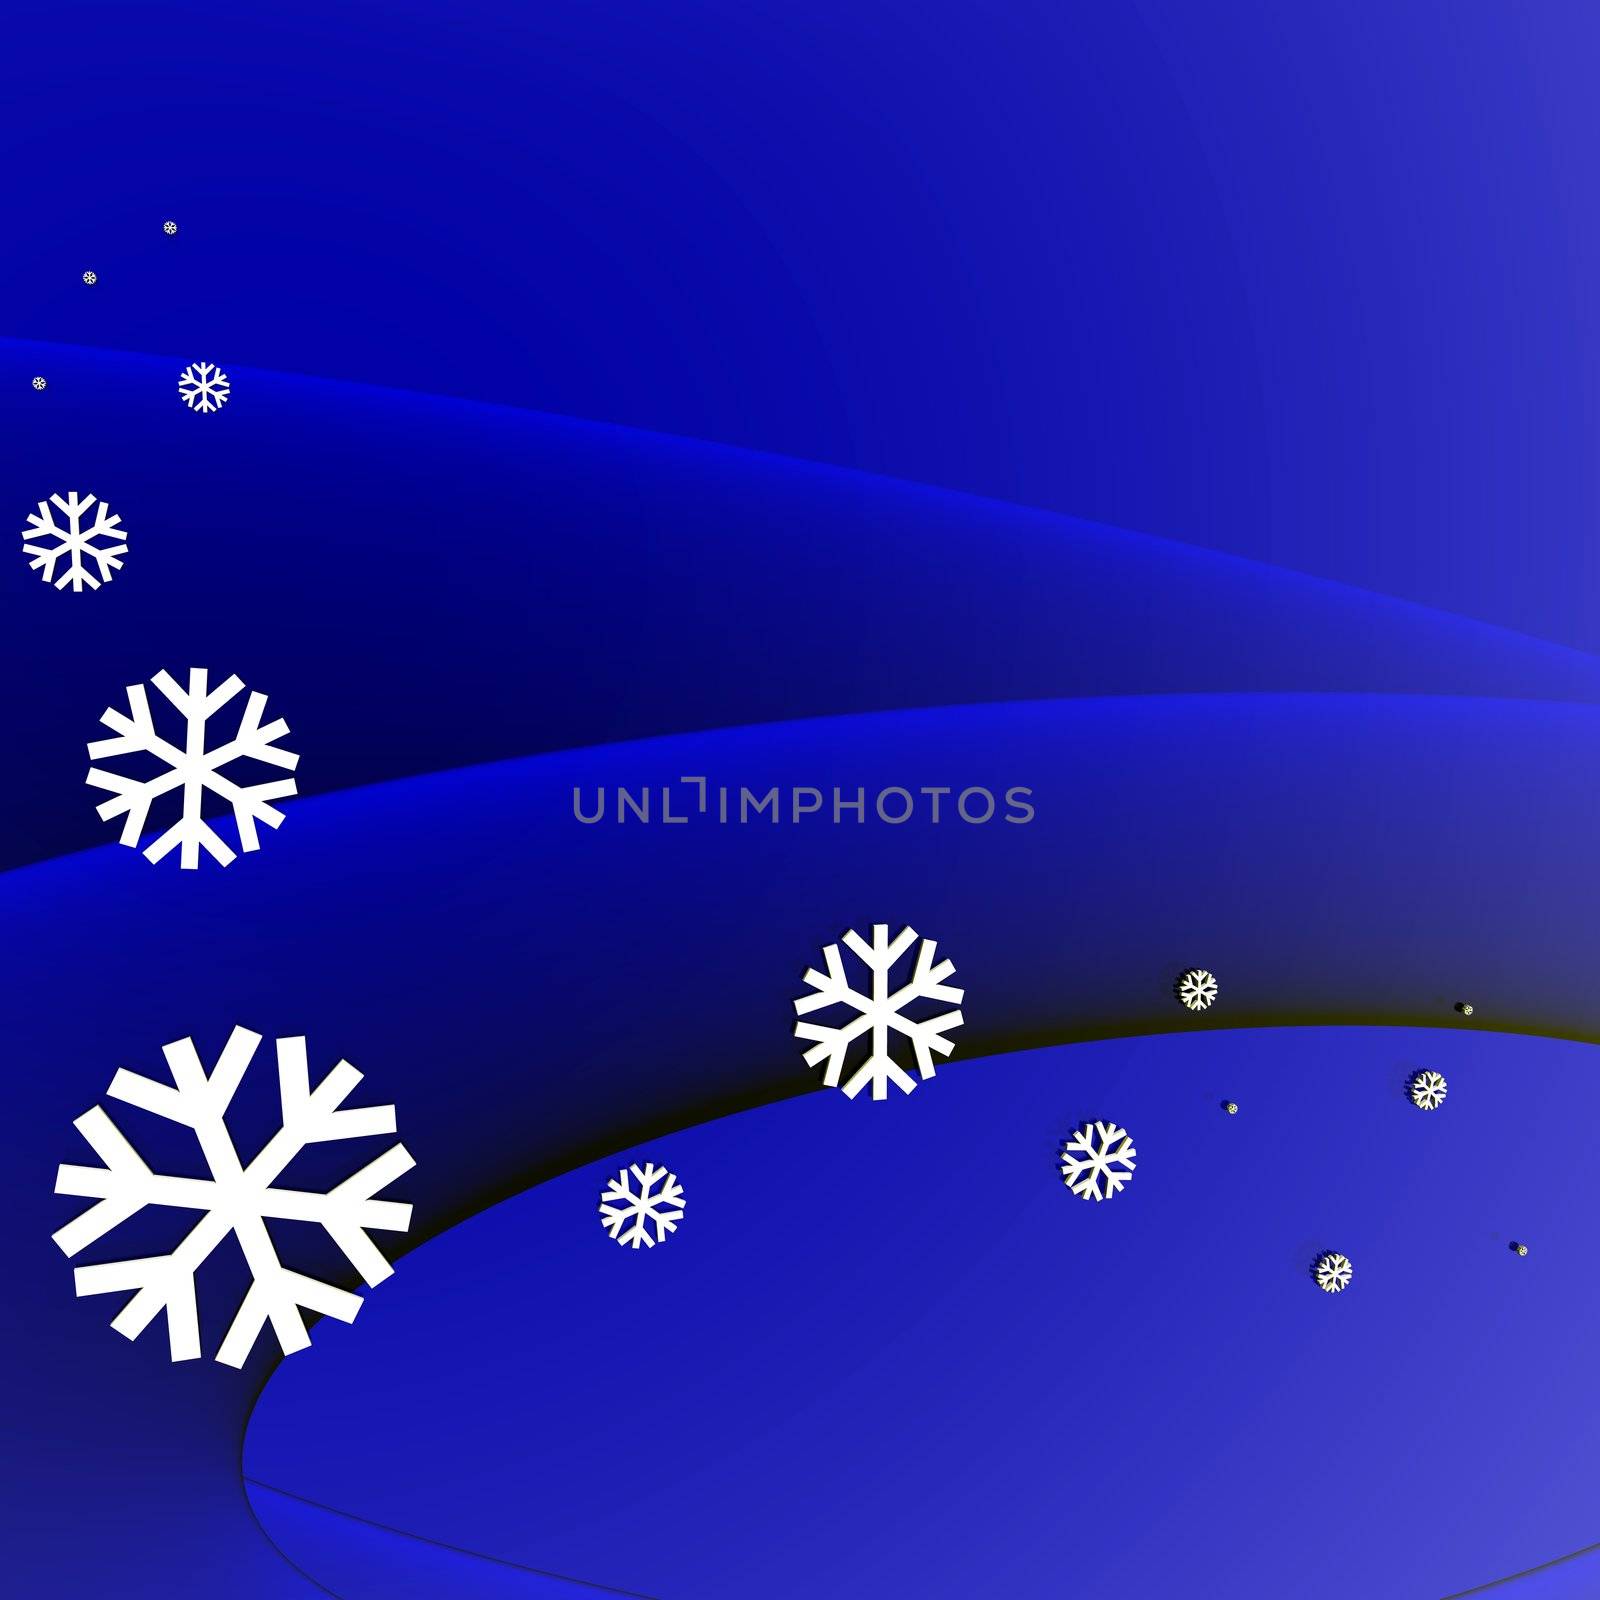 An illustration of snow with room for text.